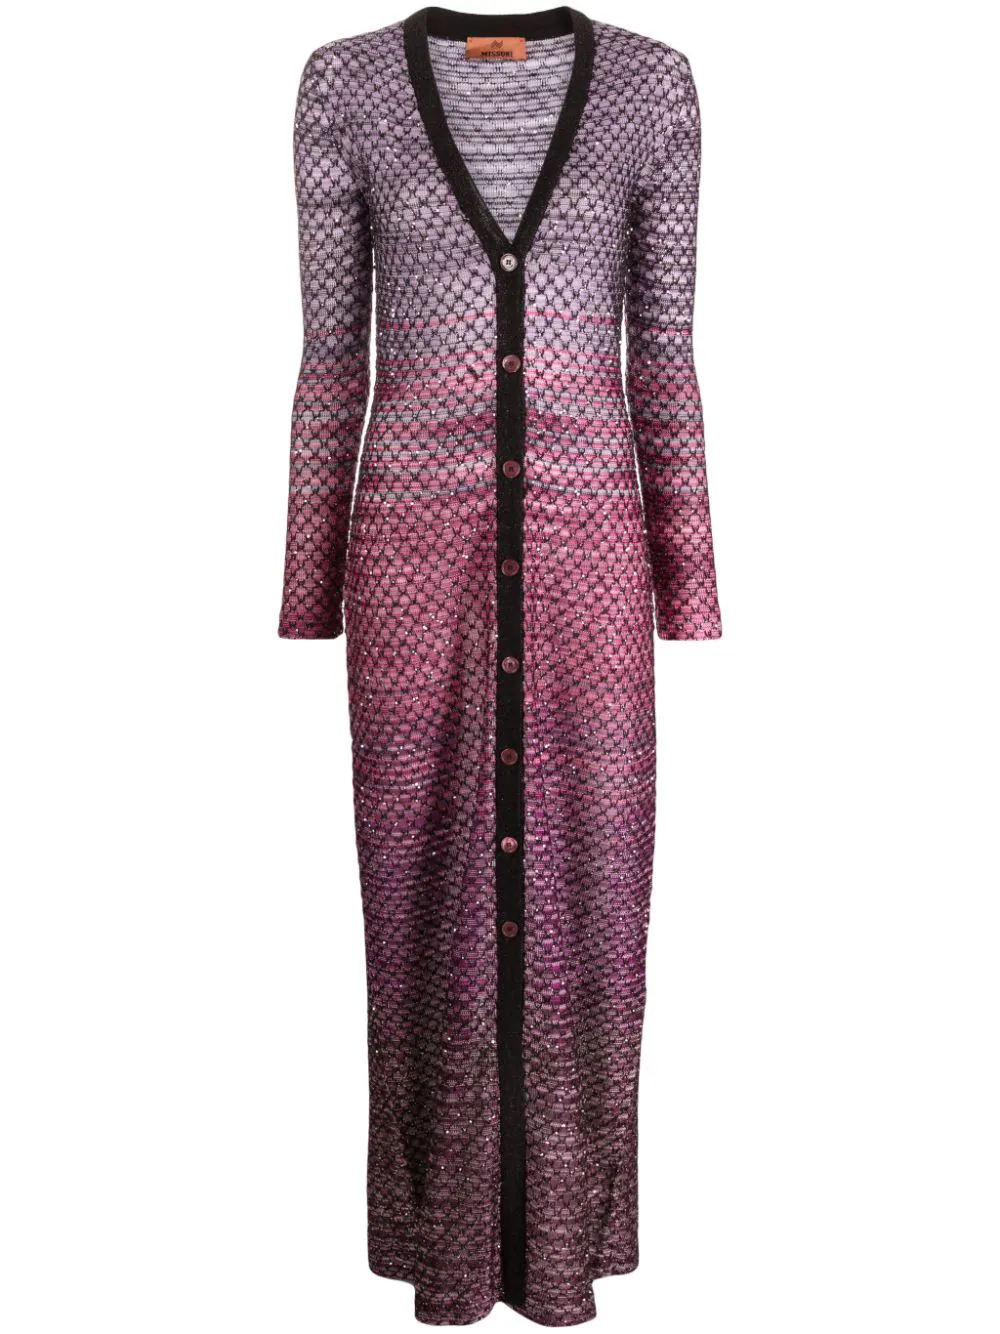 MISSONI MAXI MESH CARDIGAN EMBELLISHED WITH SEQUINS